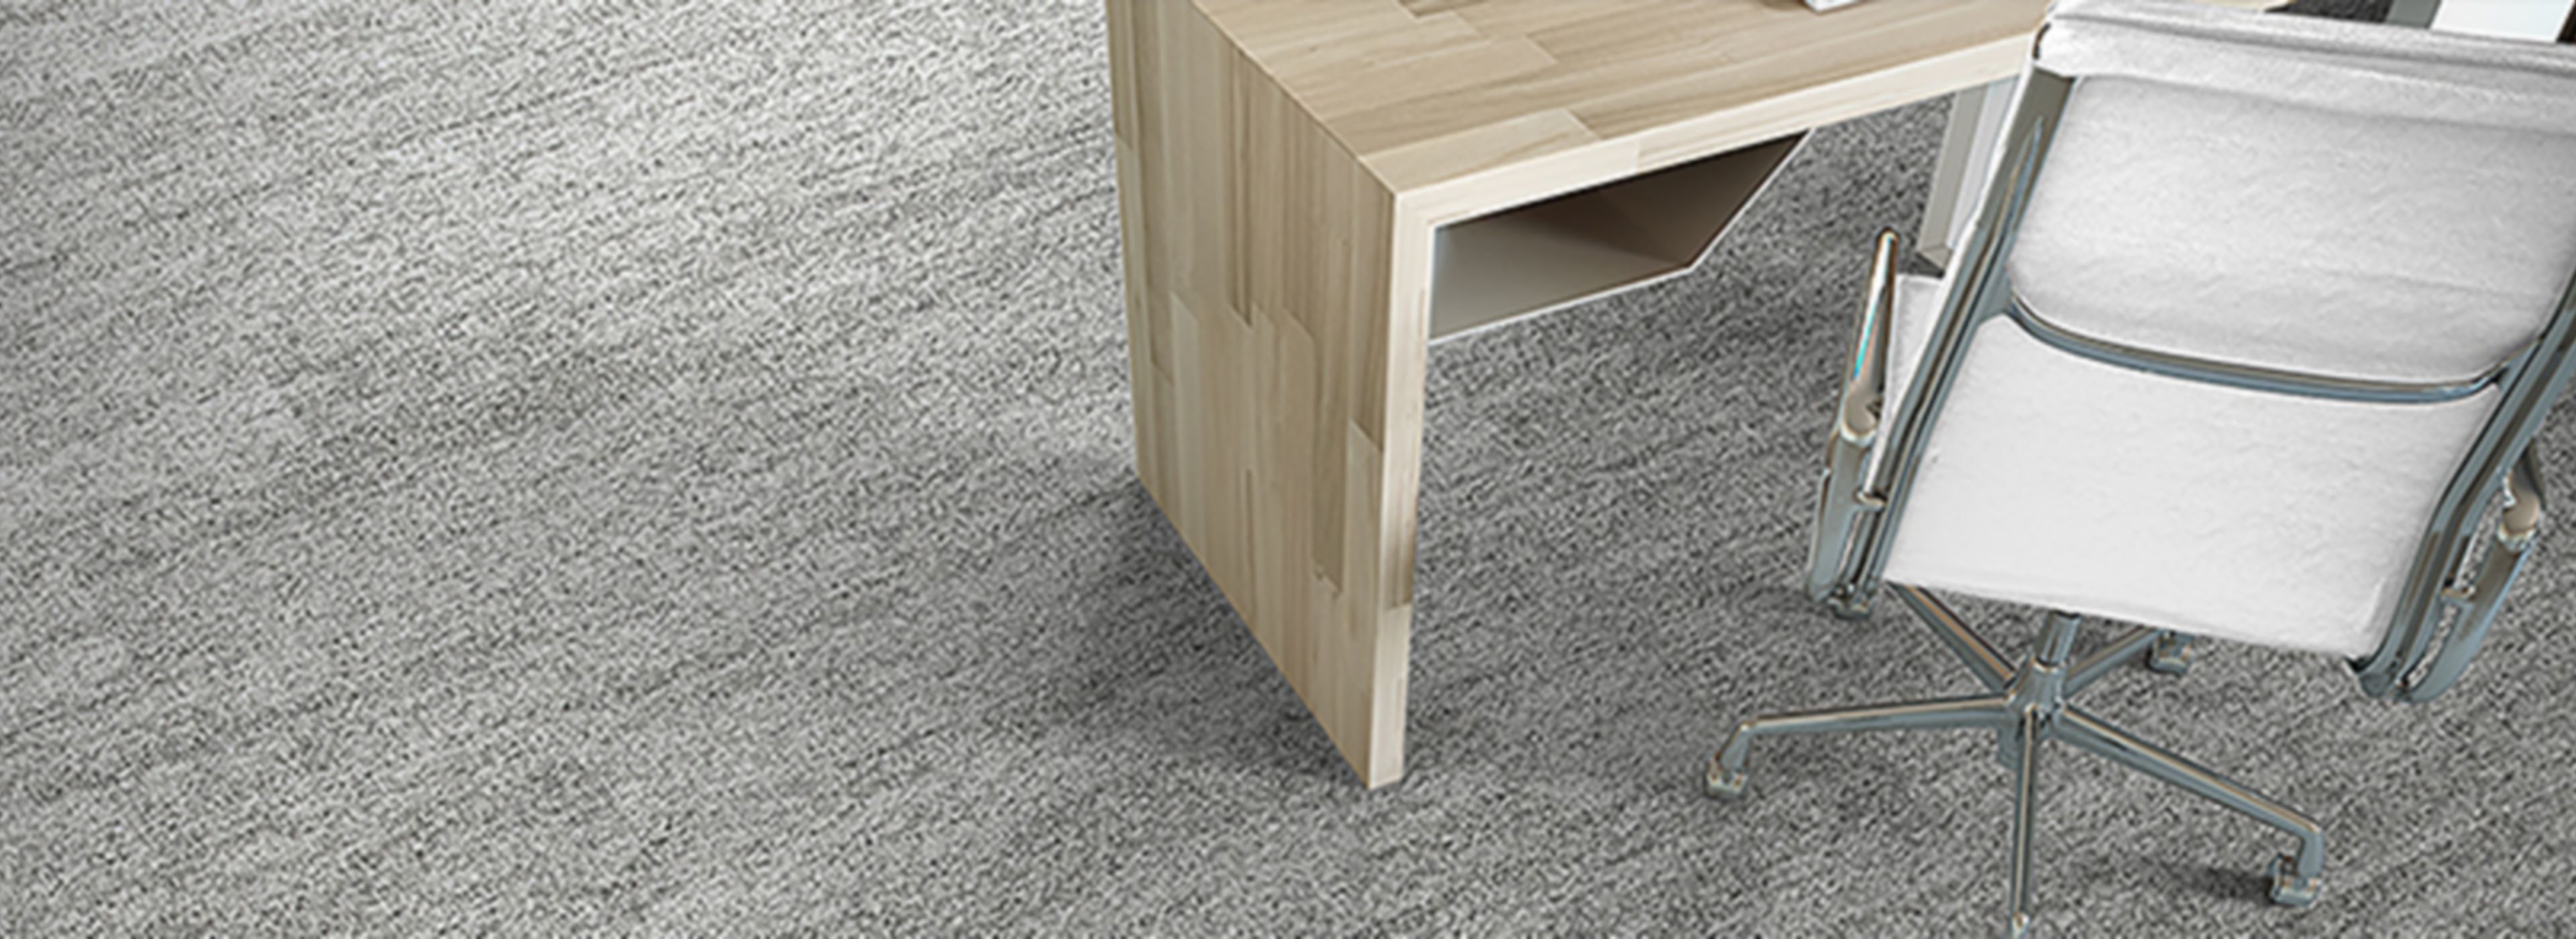 image Interface Open Air 402 plank carpet tile in floor view with wood work desk and rolling office chair numéro 1